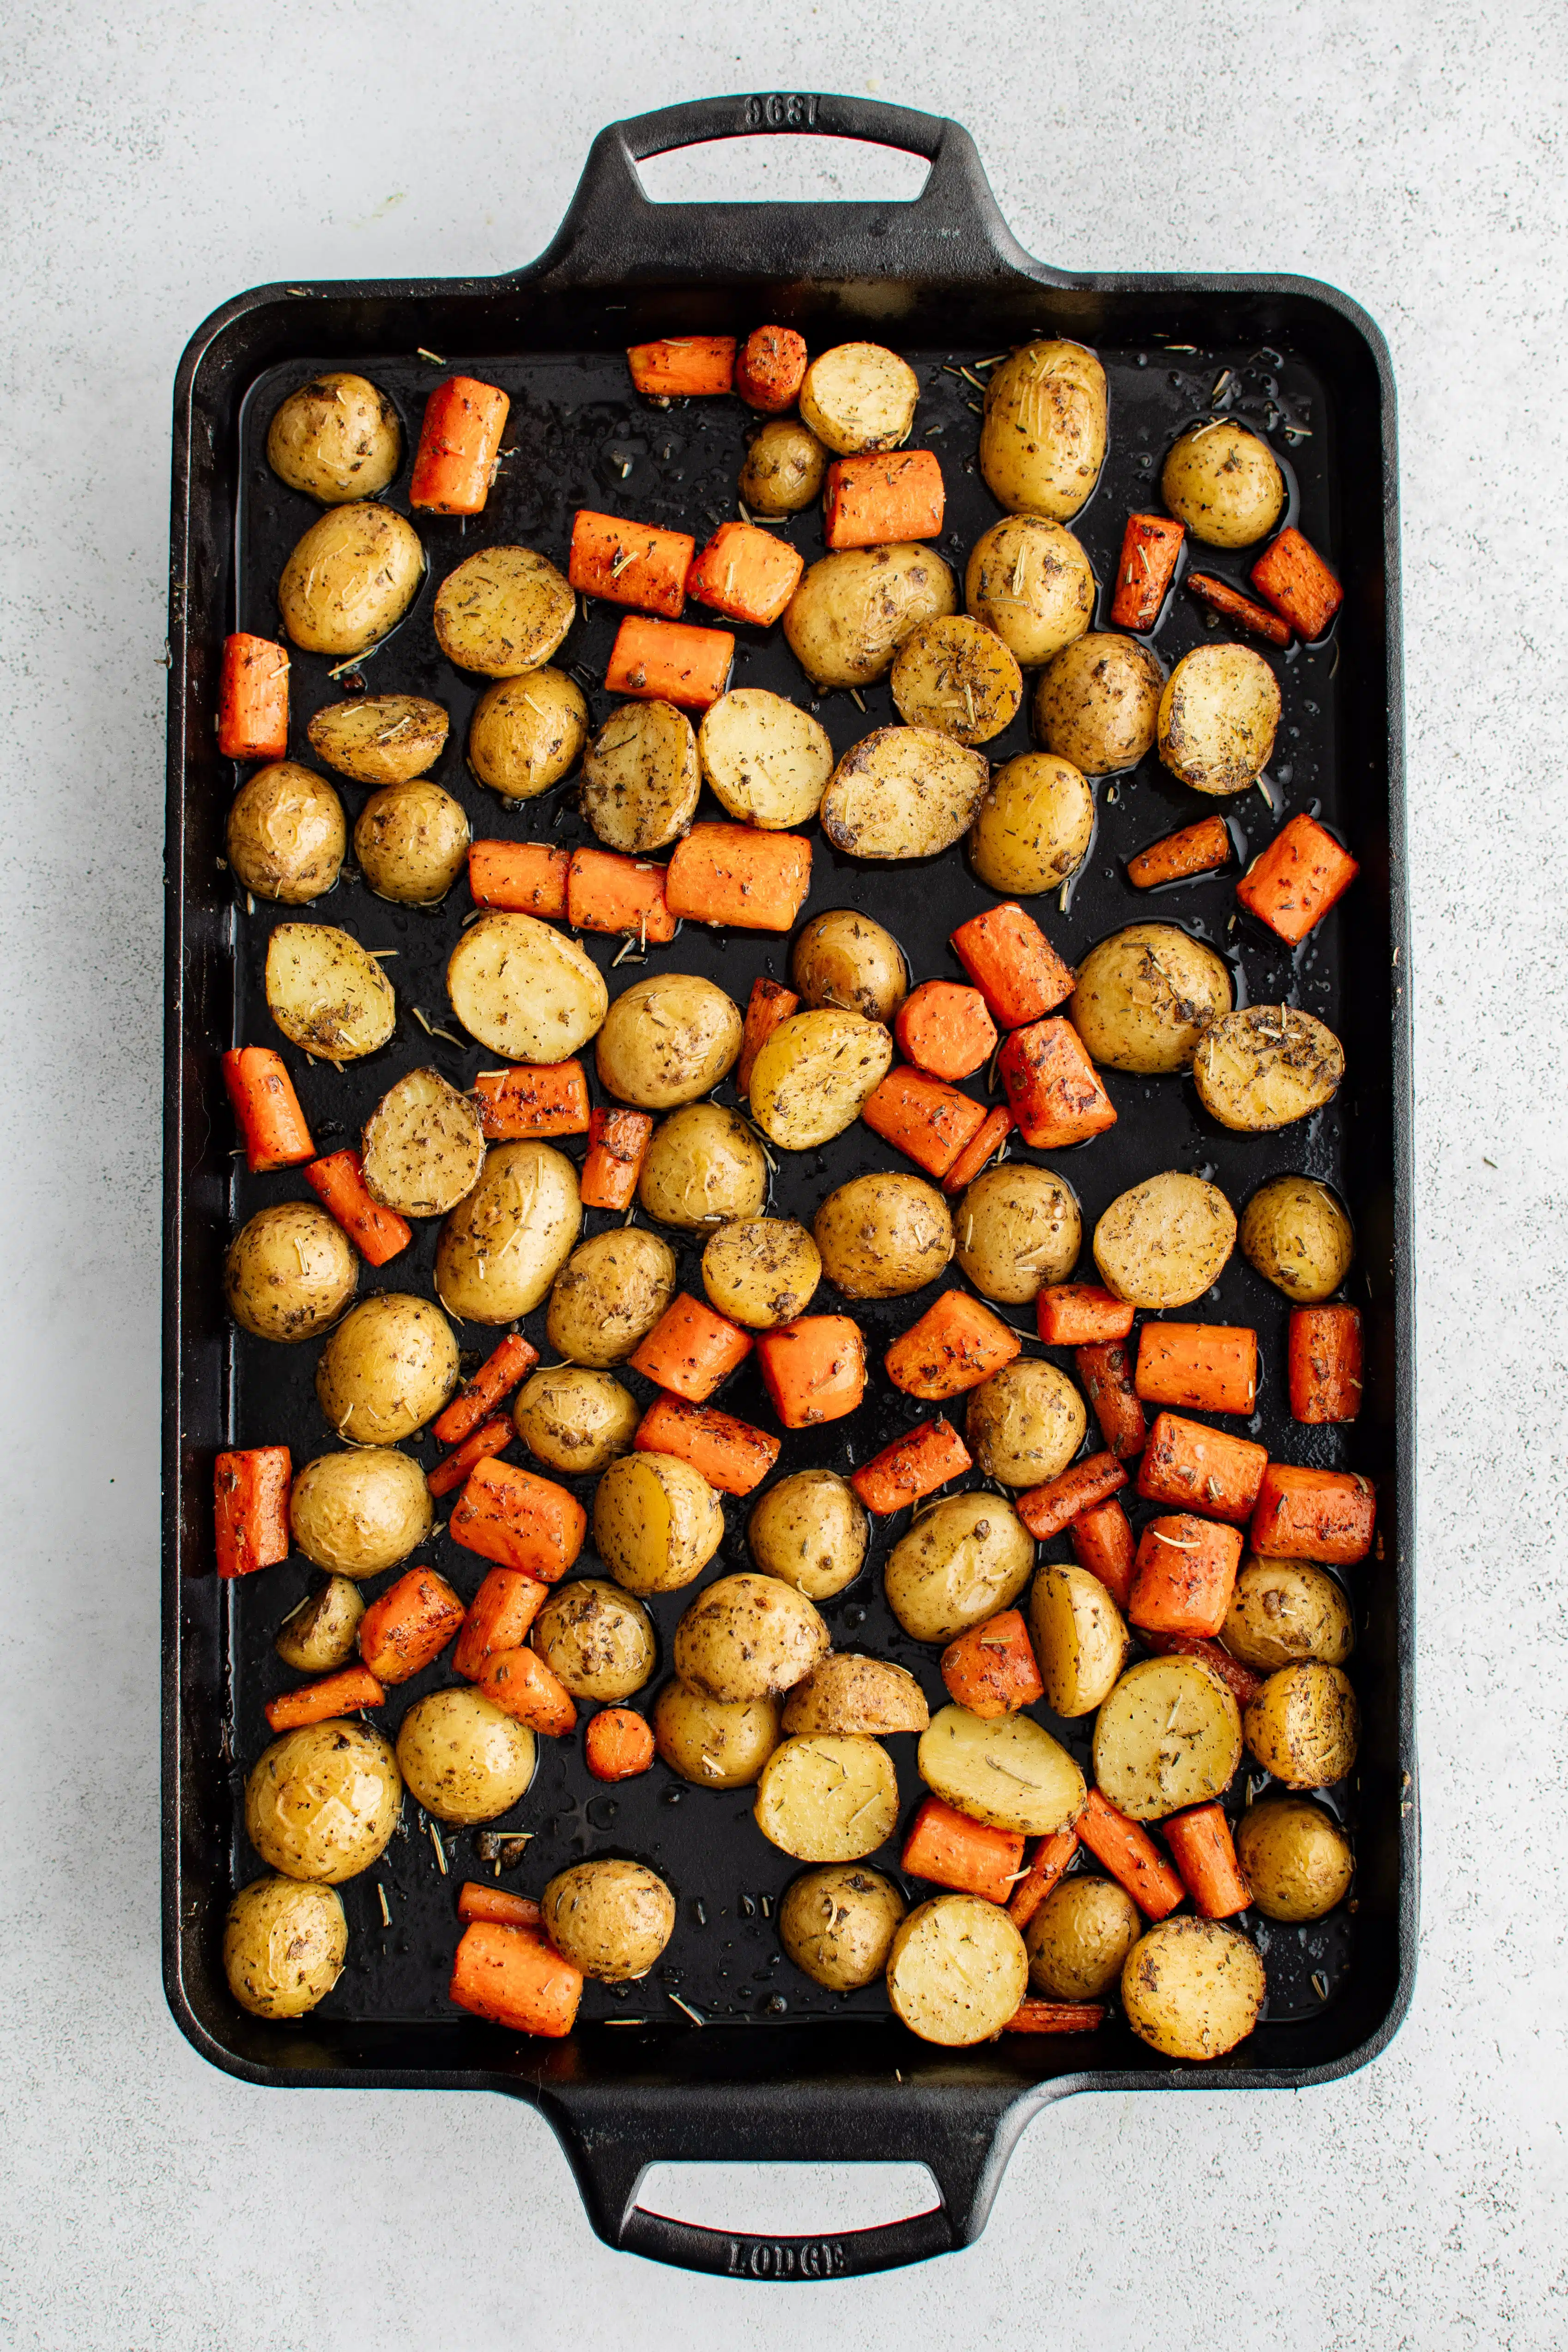 Large Lodge cast iron baking sheet pan covered with roasted halved baby potatoes and carrots.